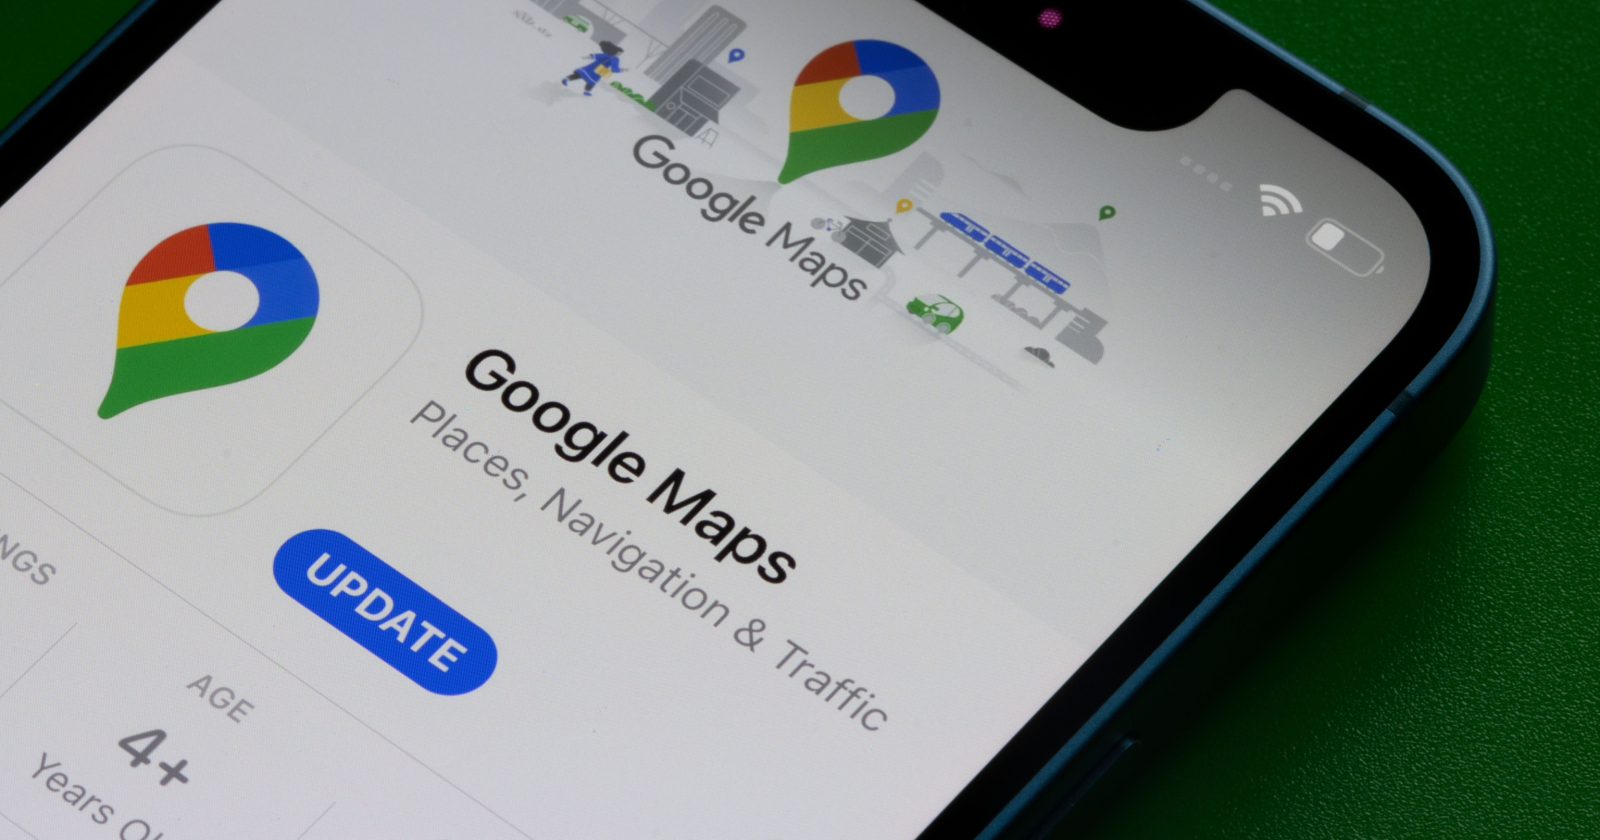 Check Out the Latest Google Maps Update Easier Navigation with Cool New Features